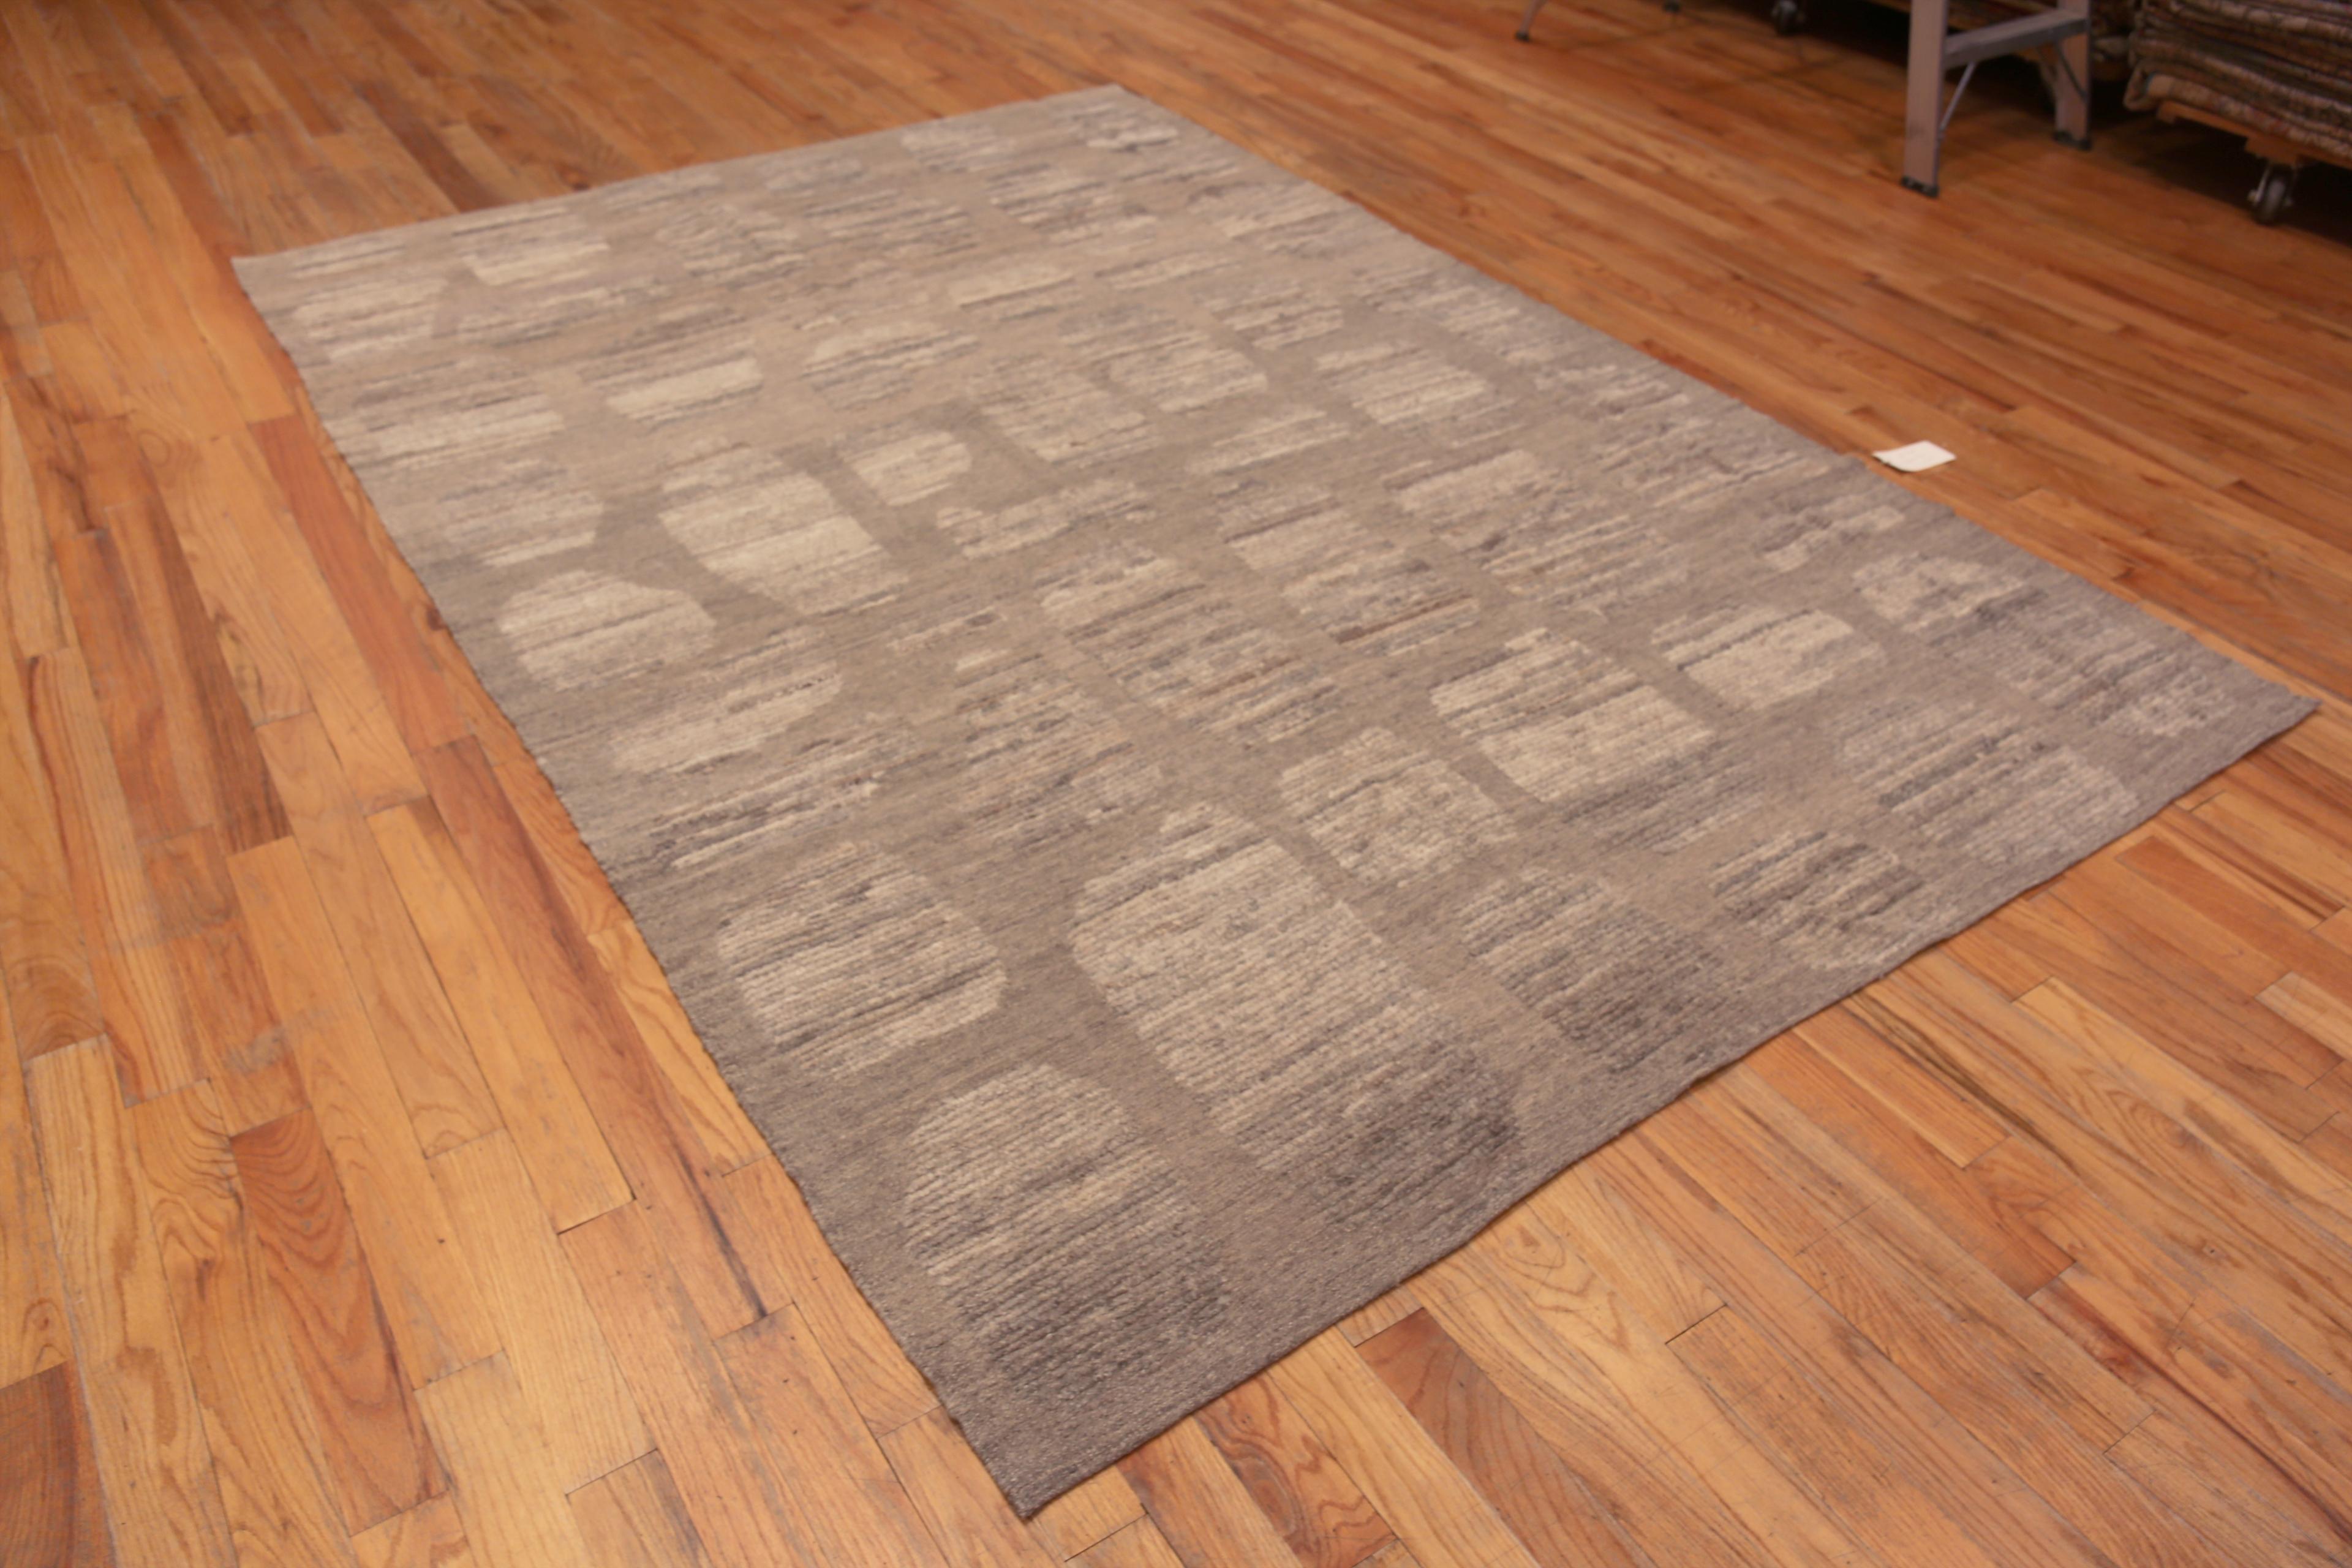 A Beautifully Decorative Soft Neutral Grey Color High Low Wool Pile Modern Tribal Room Size Area Rug, Country of Origin: Central Asia, Circa Date: Modern Rug 